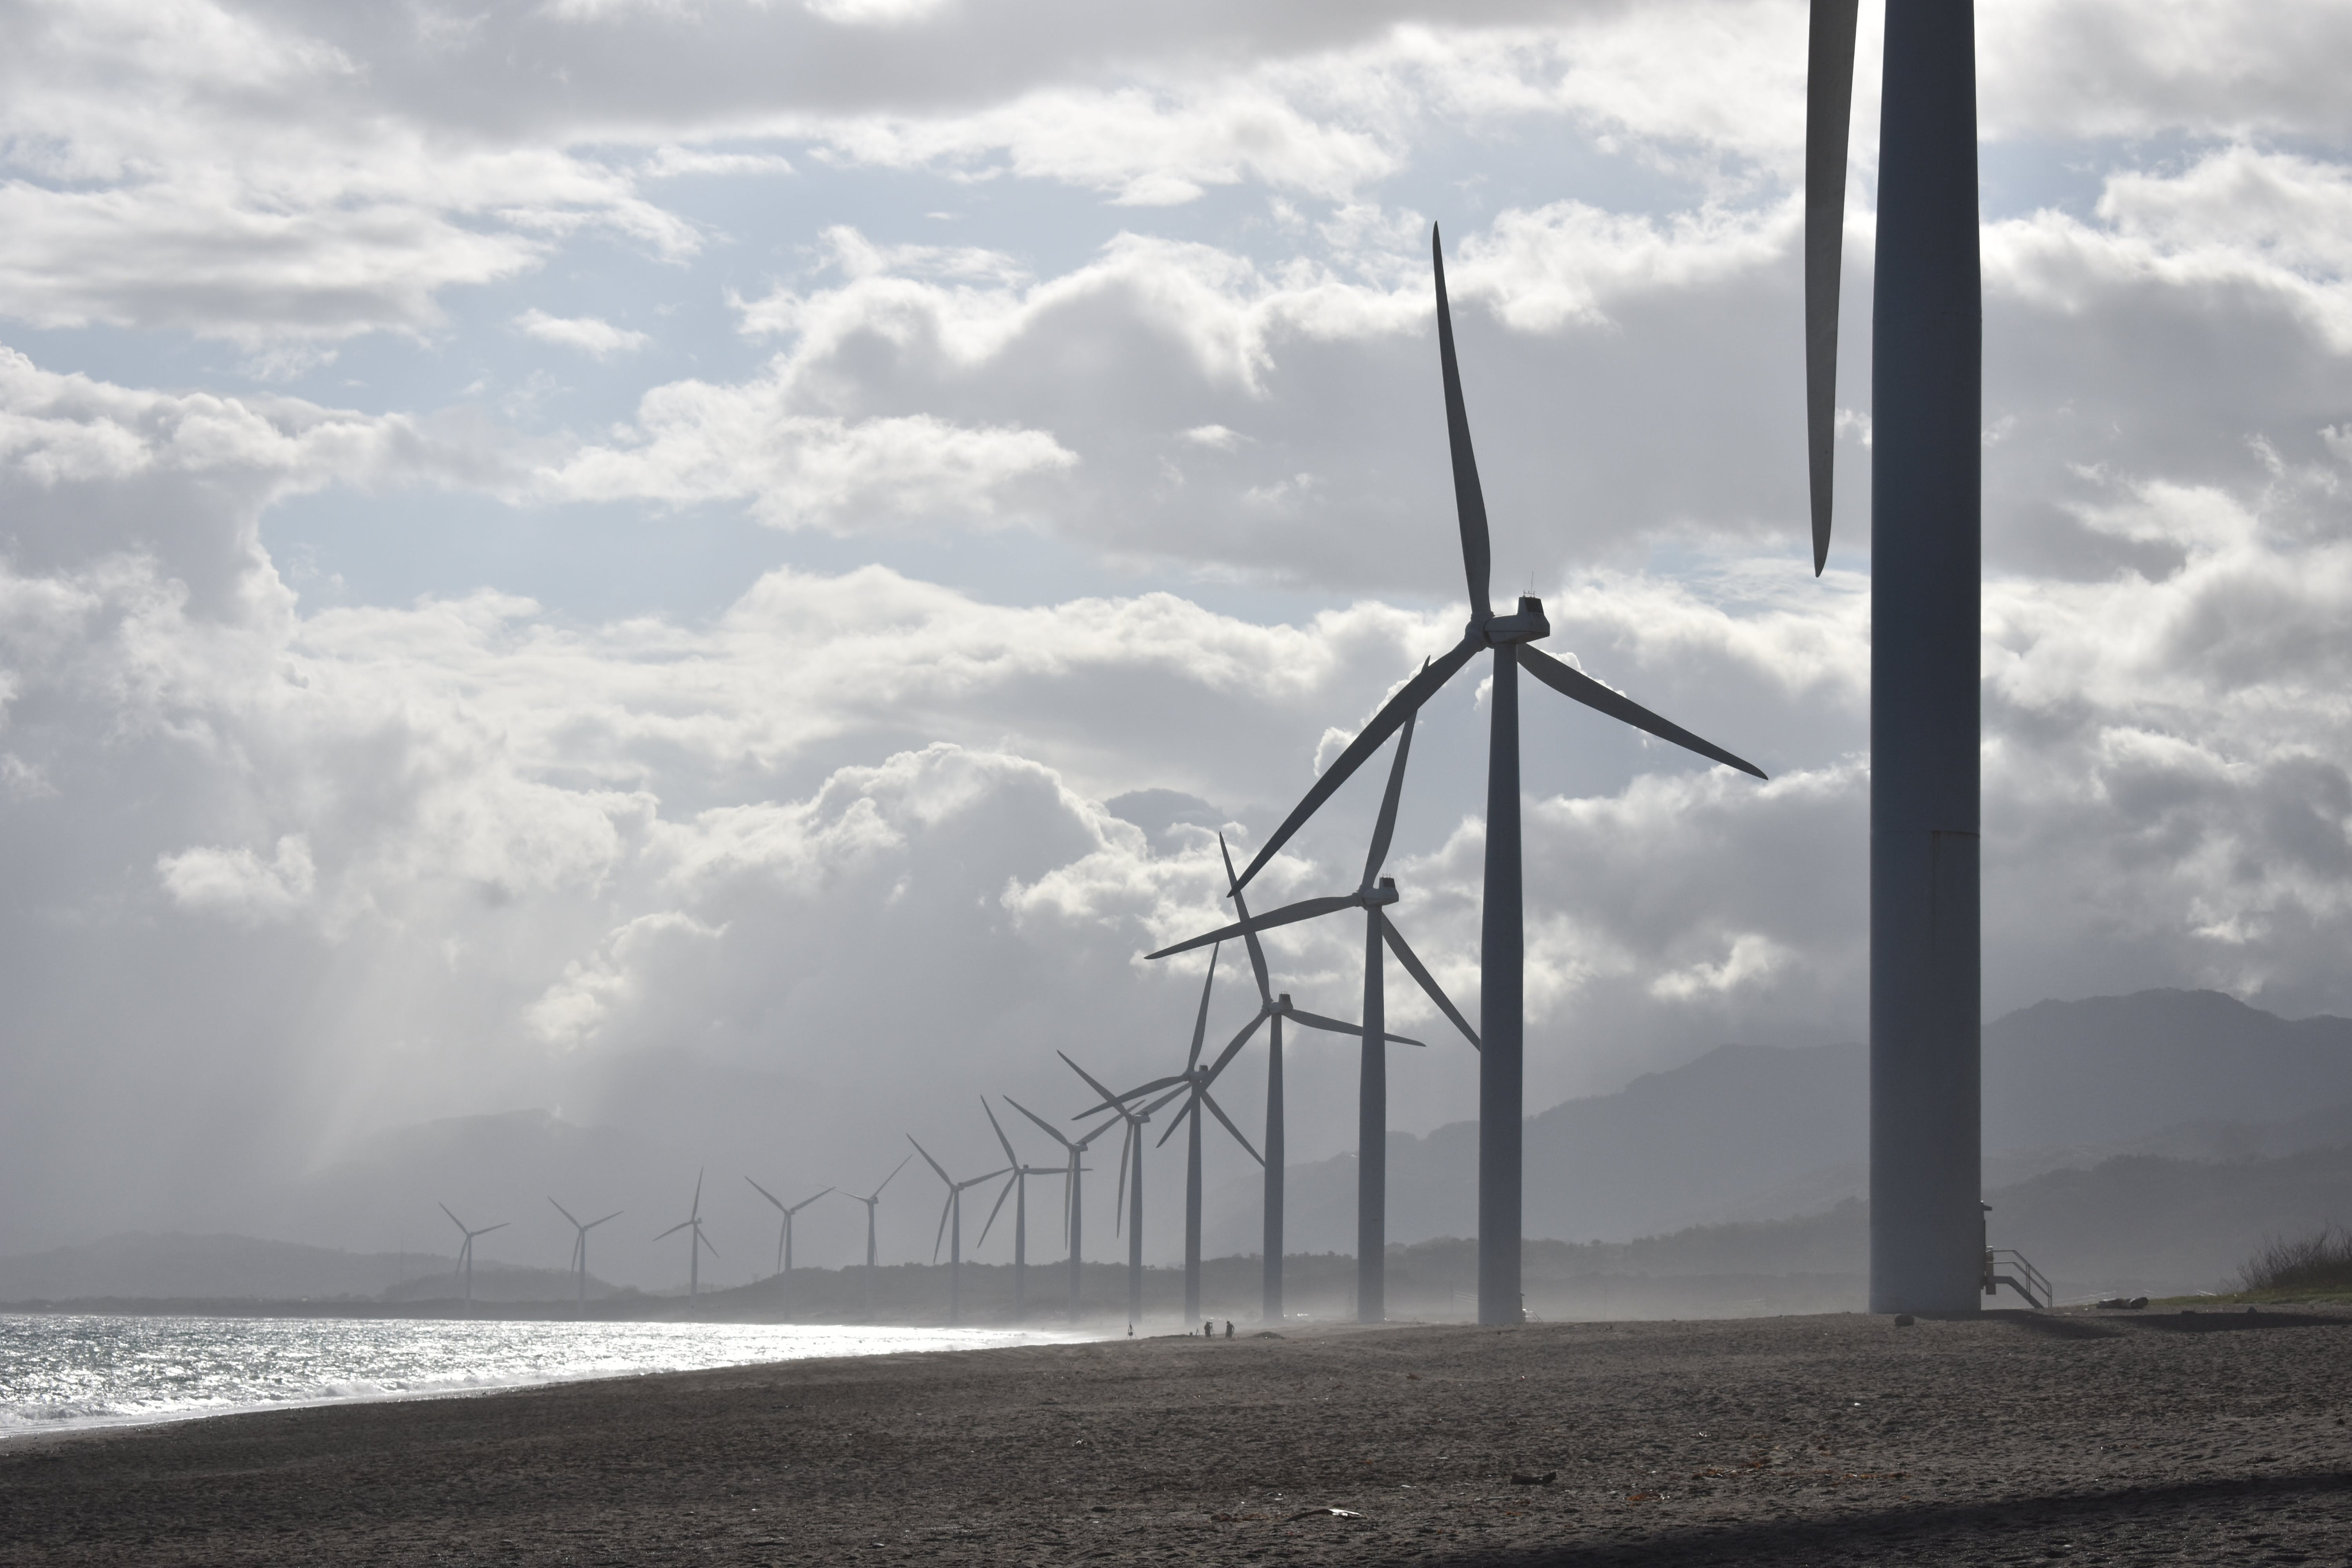 A line of wind turbines along a shoreline in cloudy weather.